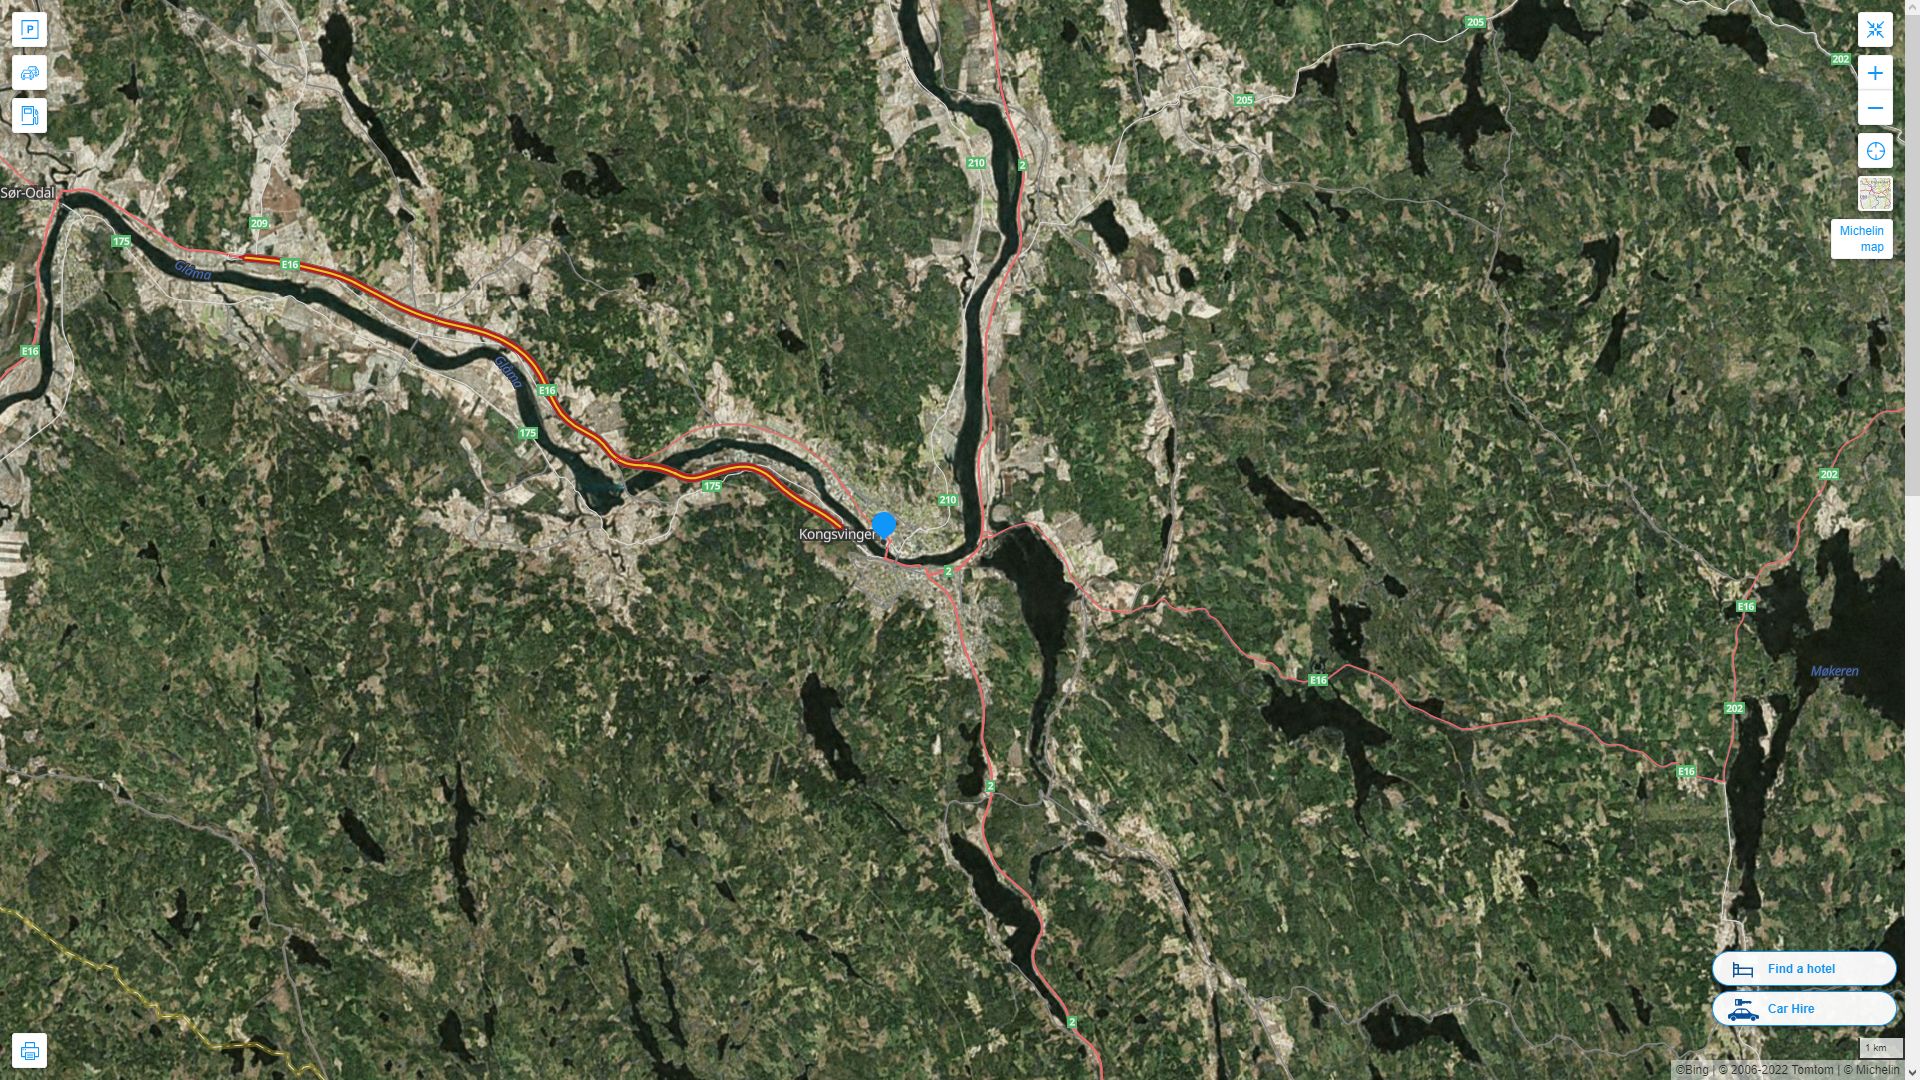 Kongsvinger Highway and Road Map with Satellite View